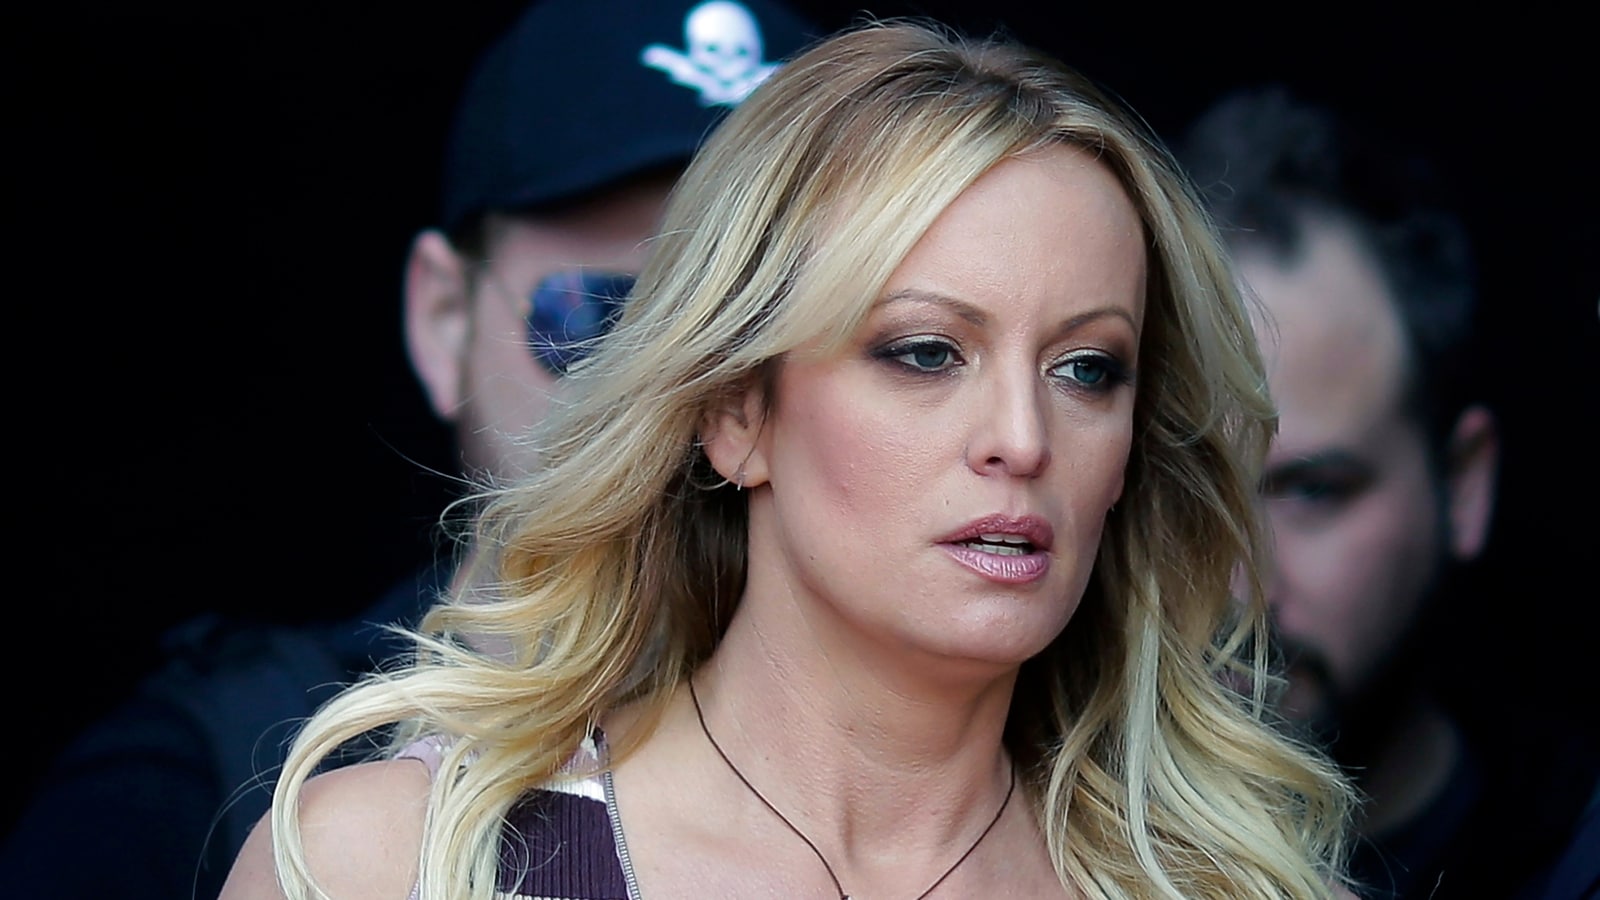 ‘Paralyzed’ with fear Stormy Daniels wore a bulletproof vest to Donald Trump's hush money trial